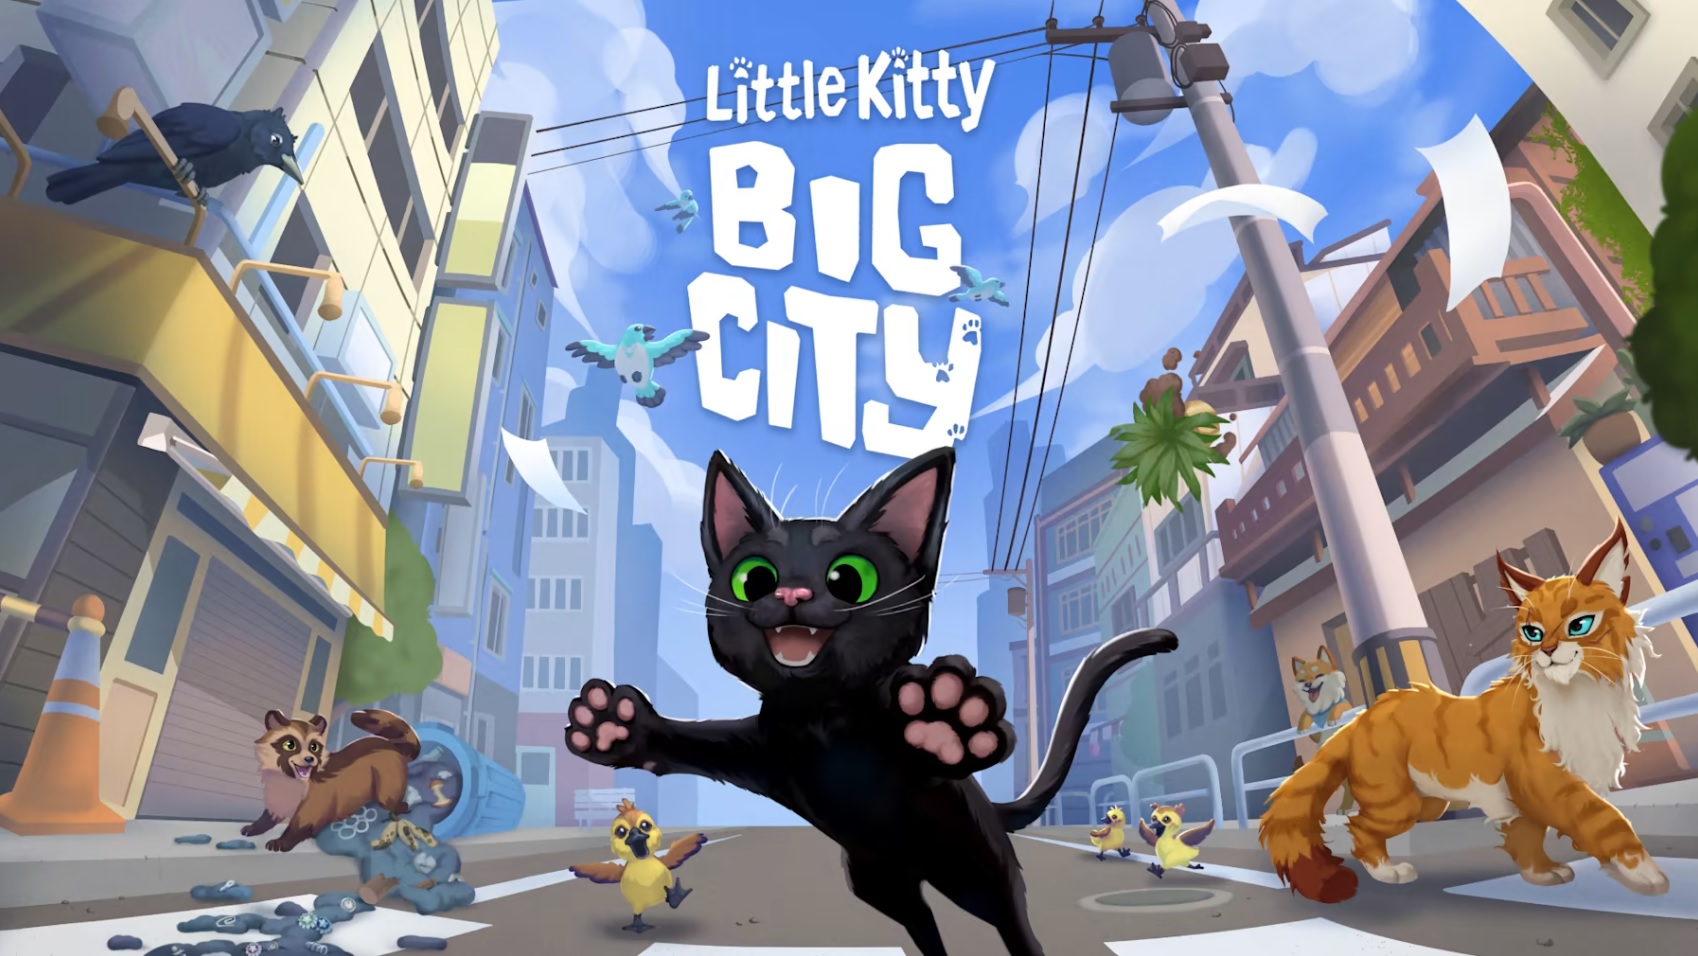 Explore a town as a mischievous cat in Little Kitty, Big City, out now